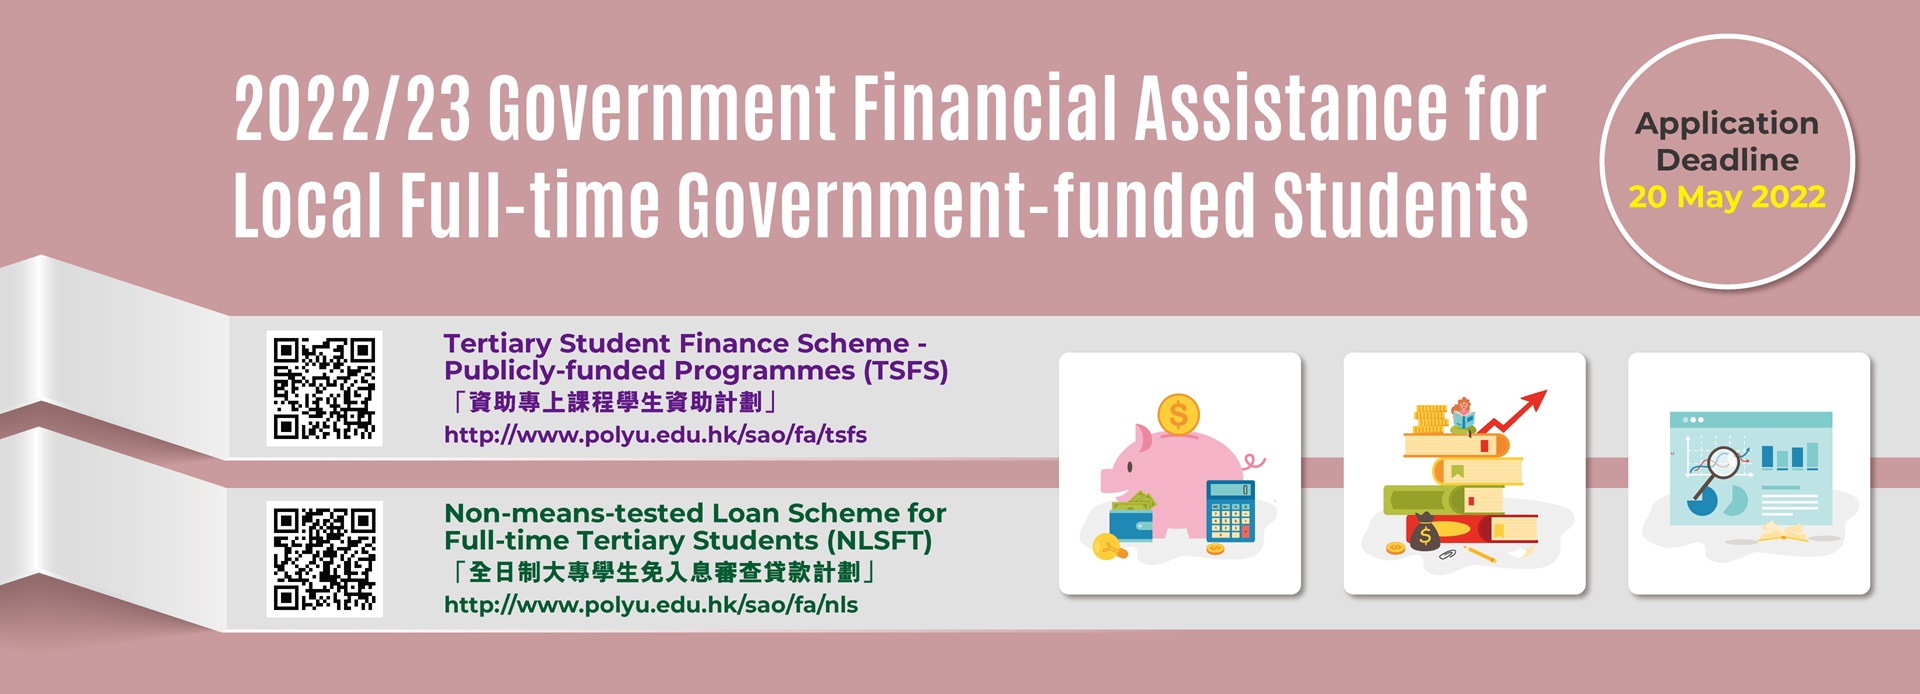 Government Financial Assistance